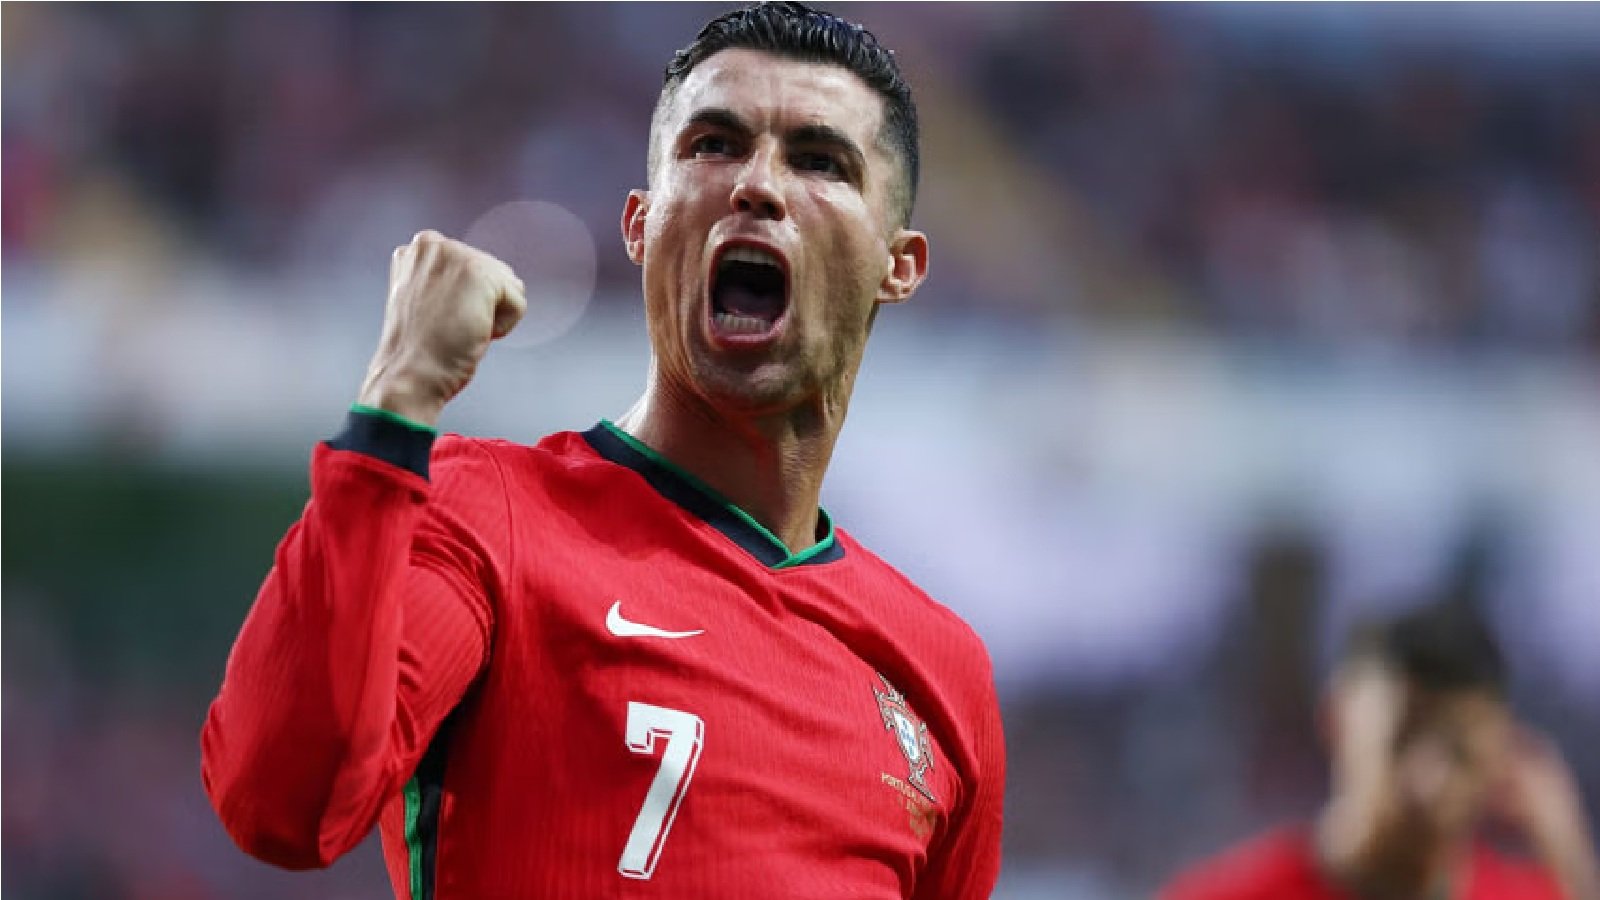 Portugal's forward Cristiano Ronaldo celebrates after scoring his side's third goal during the International friendly match against Ireland at the Municipal Stadium in Aveiro, on June 11, 2024, ahead of the UEFA Euro 2024 football tournament in Germany. PHOTO: REUTERS